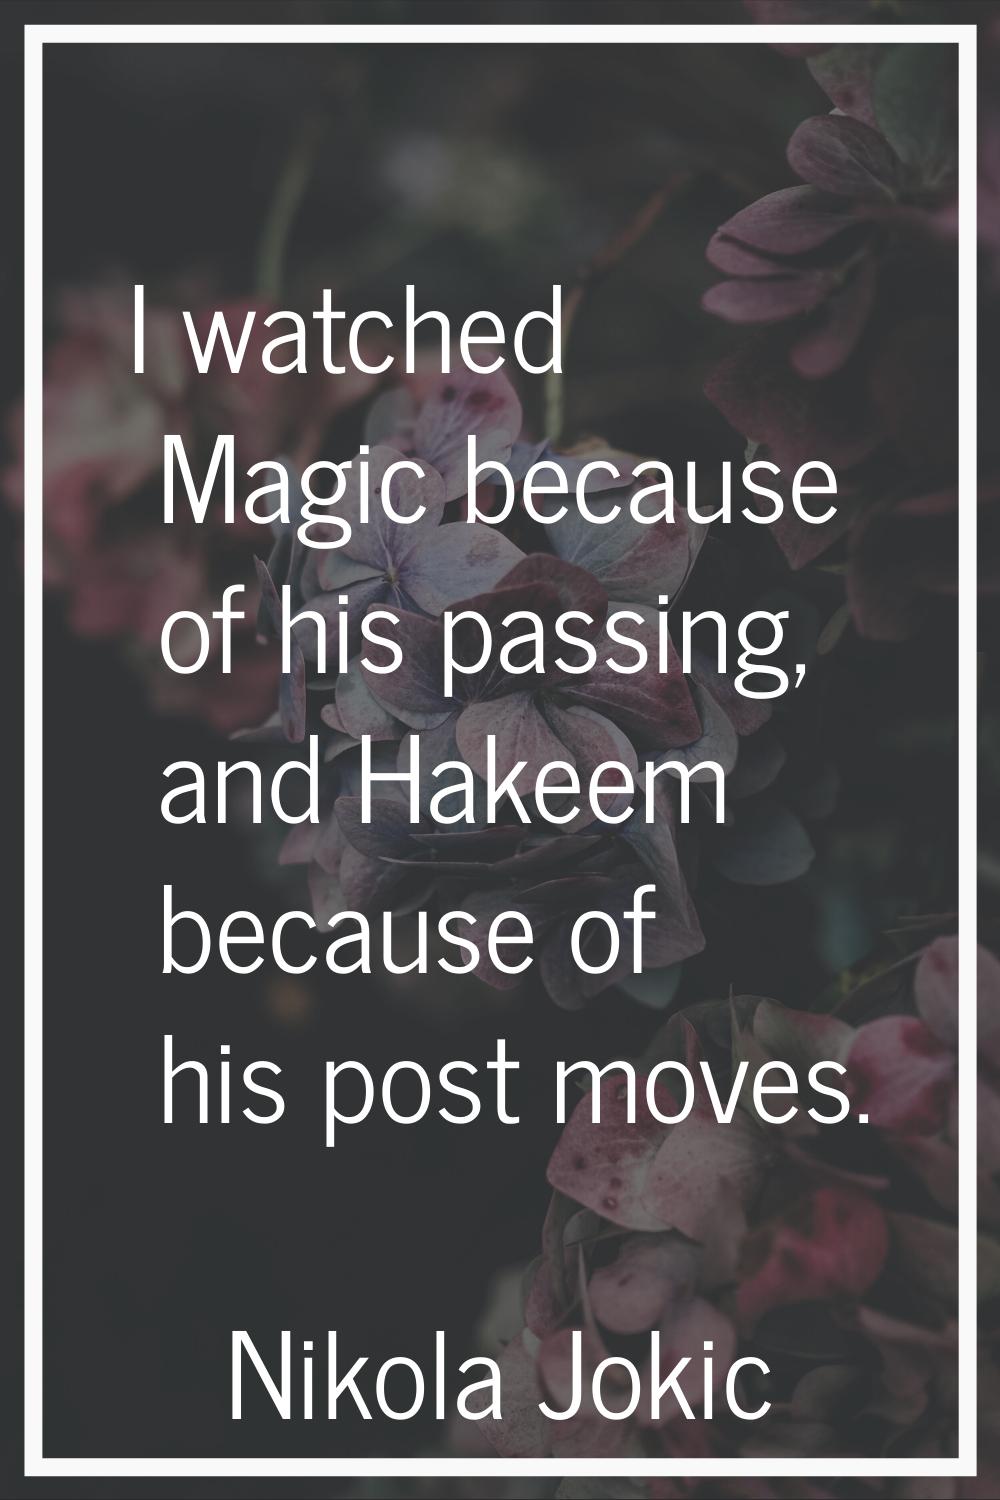 I watched Magic because of his passing, and Hakeem because of his post moves.